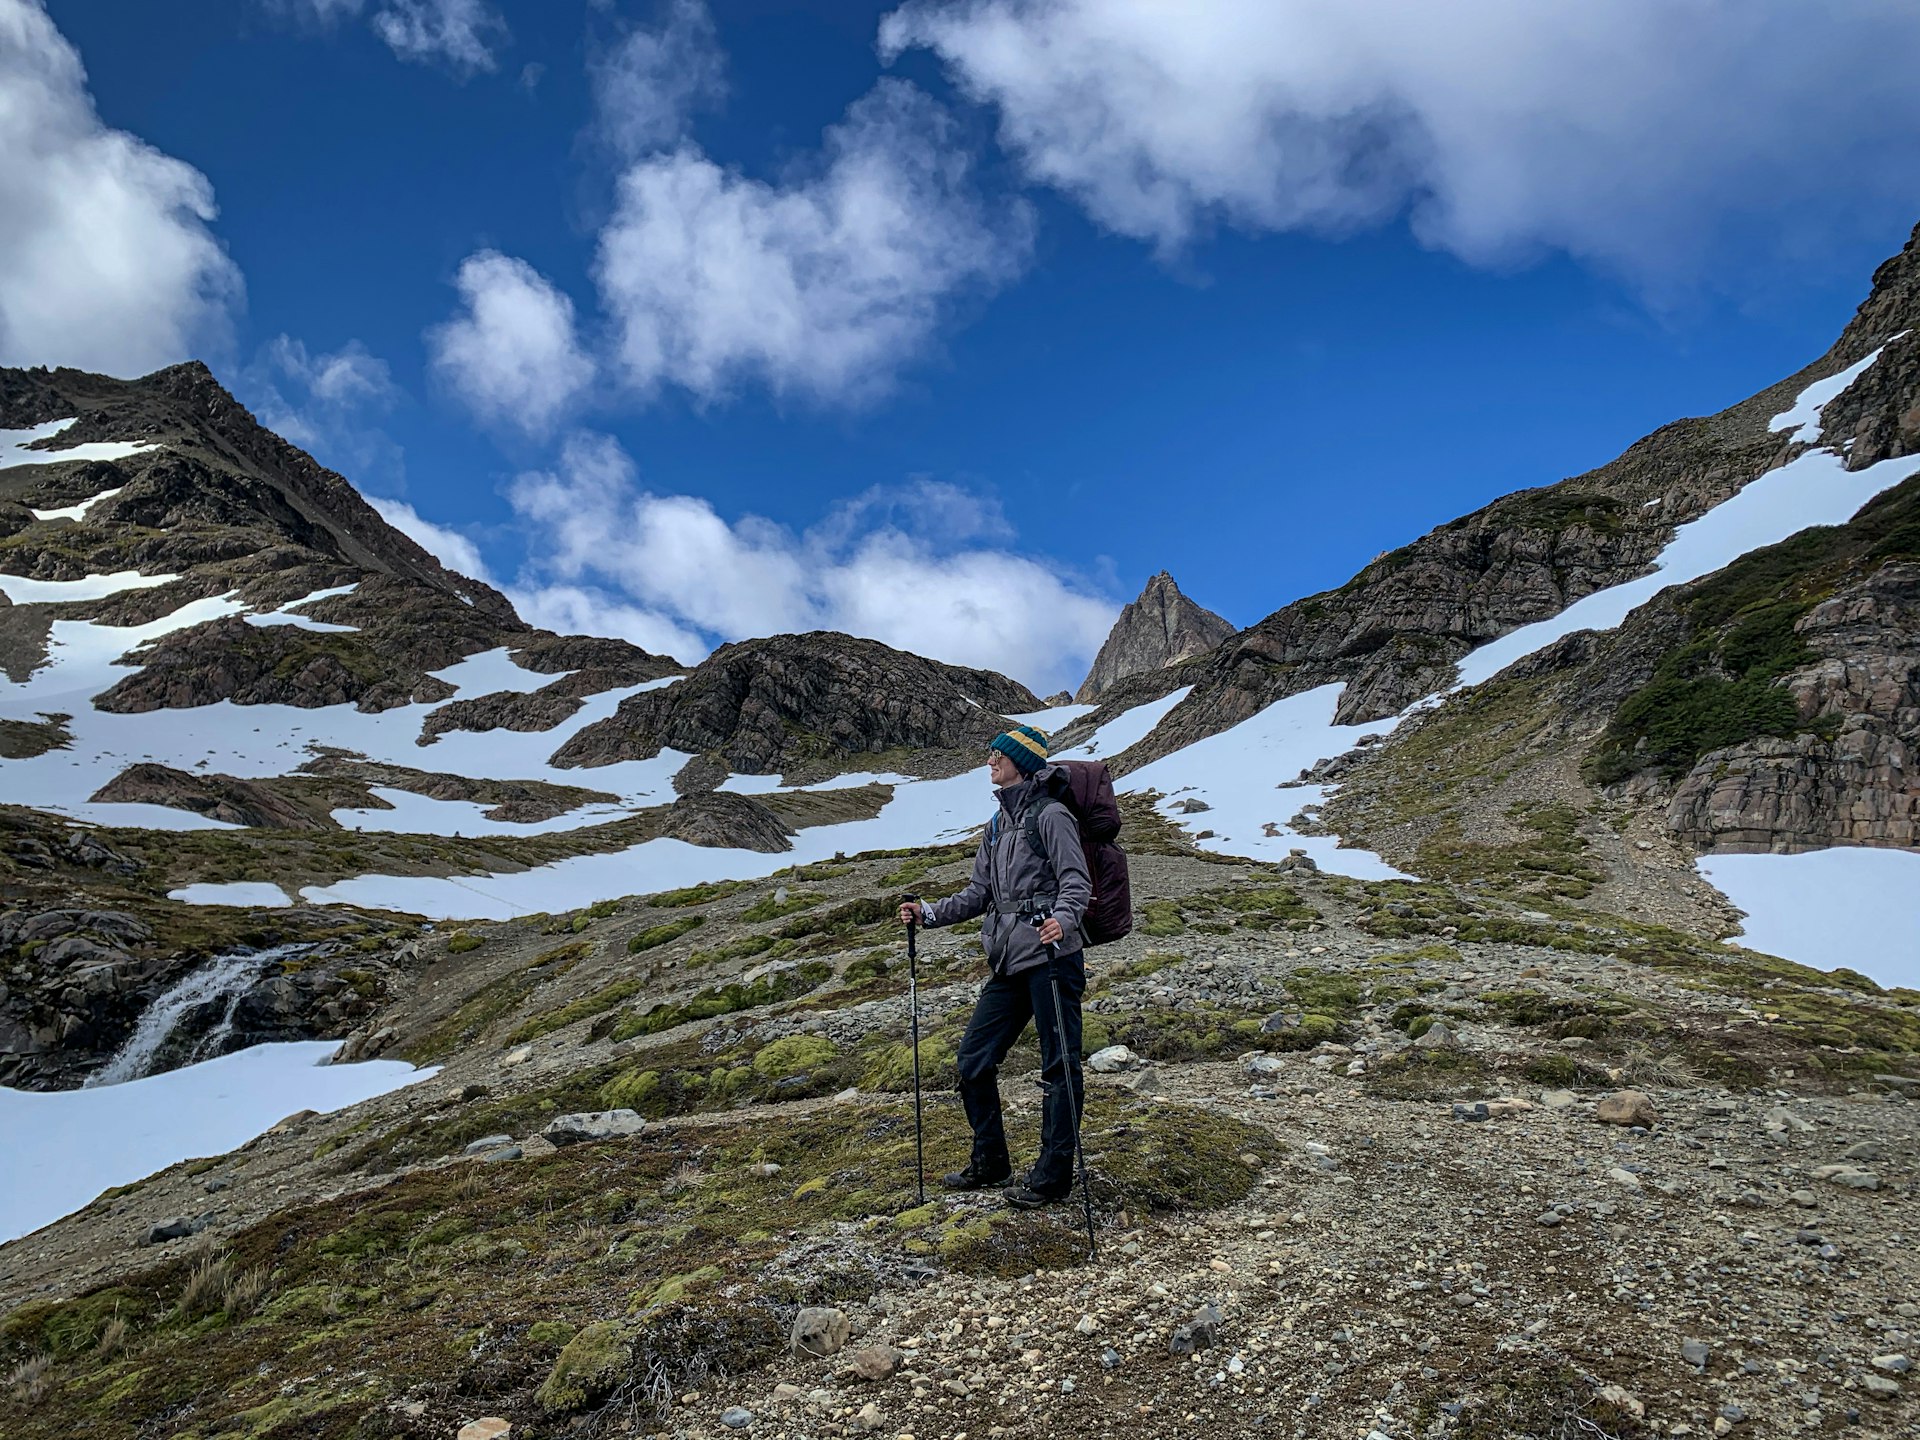 A hiker stands on a trail with mountains and blue skies in the distance.